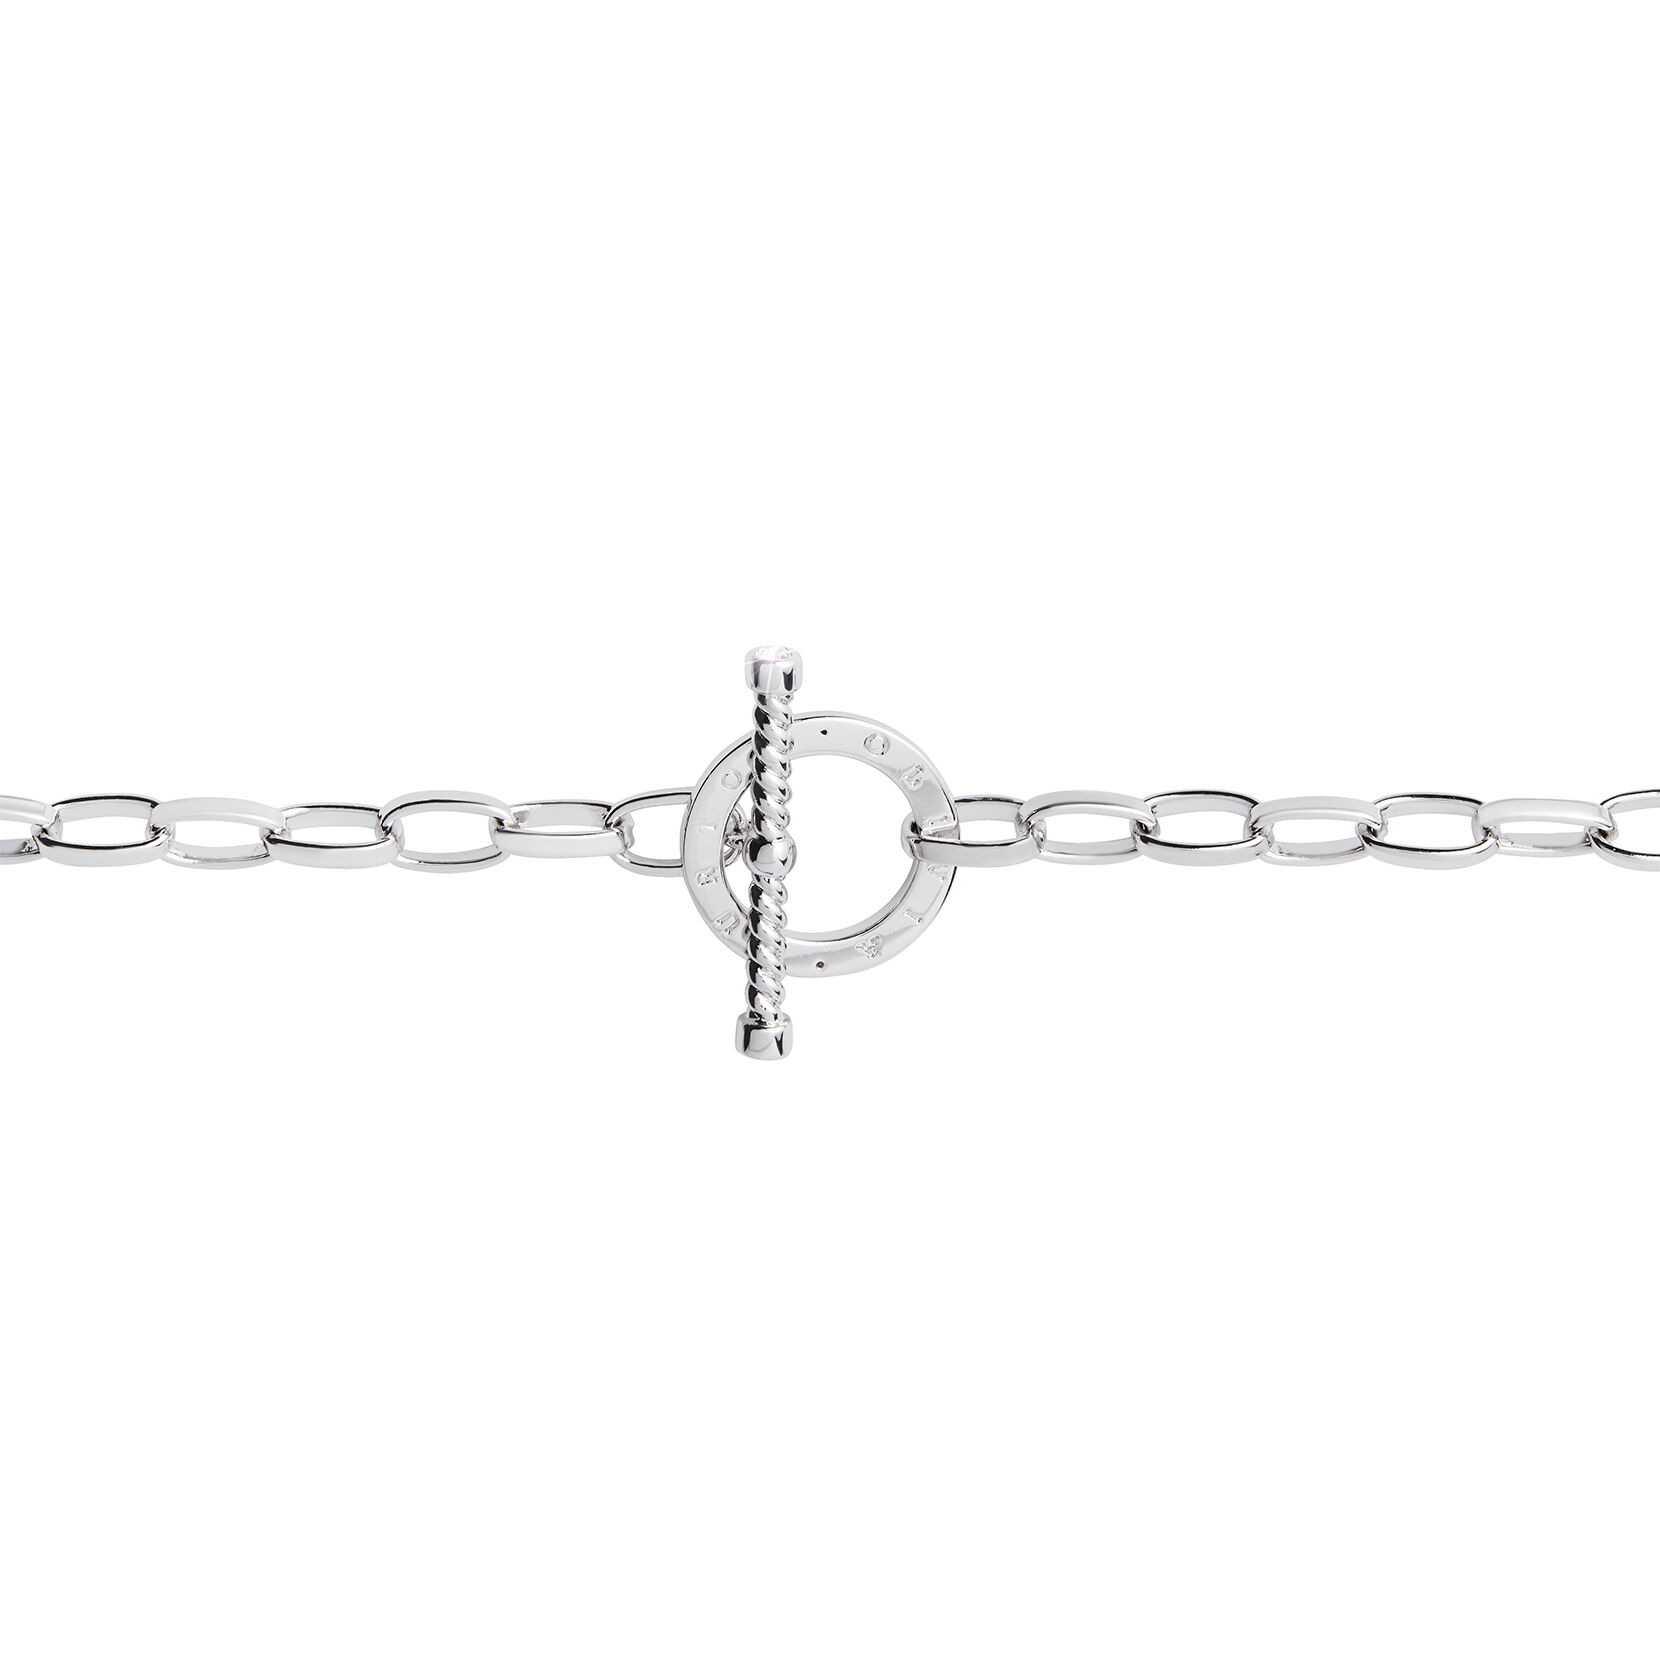 Bejewelled T-Bar Necklace Silver